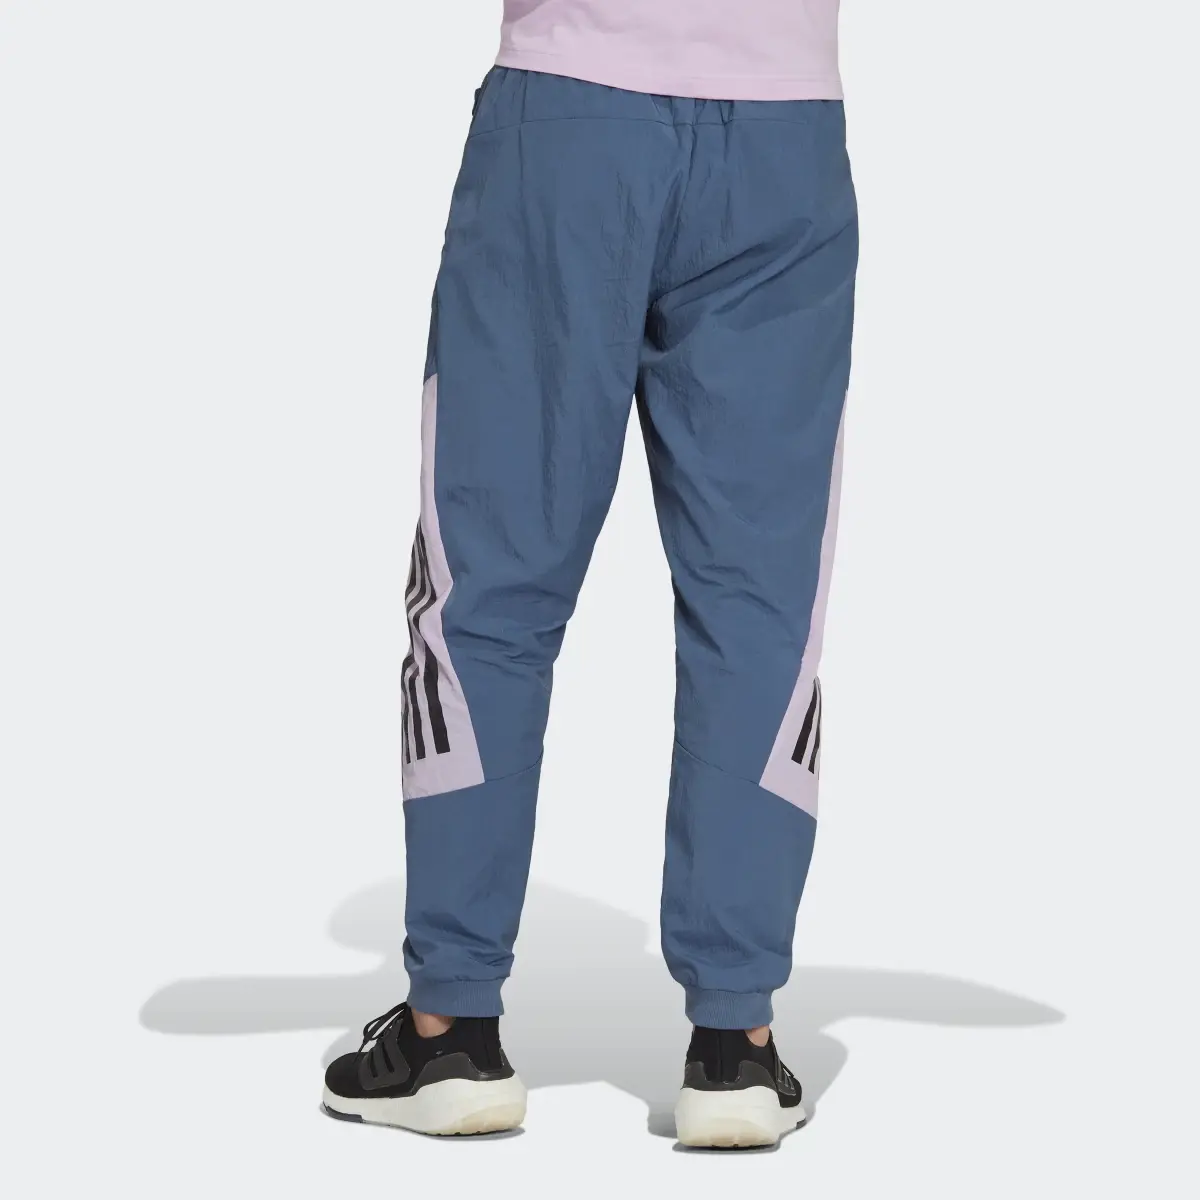 Adidas Future Icons 3-Stripes Woven Tracksuit Bottoms. 2